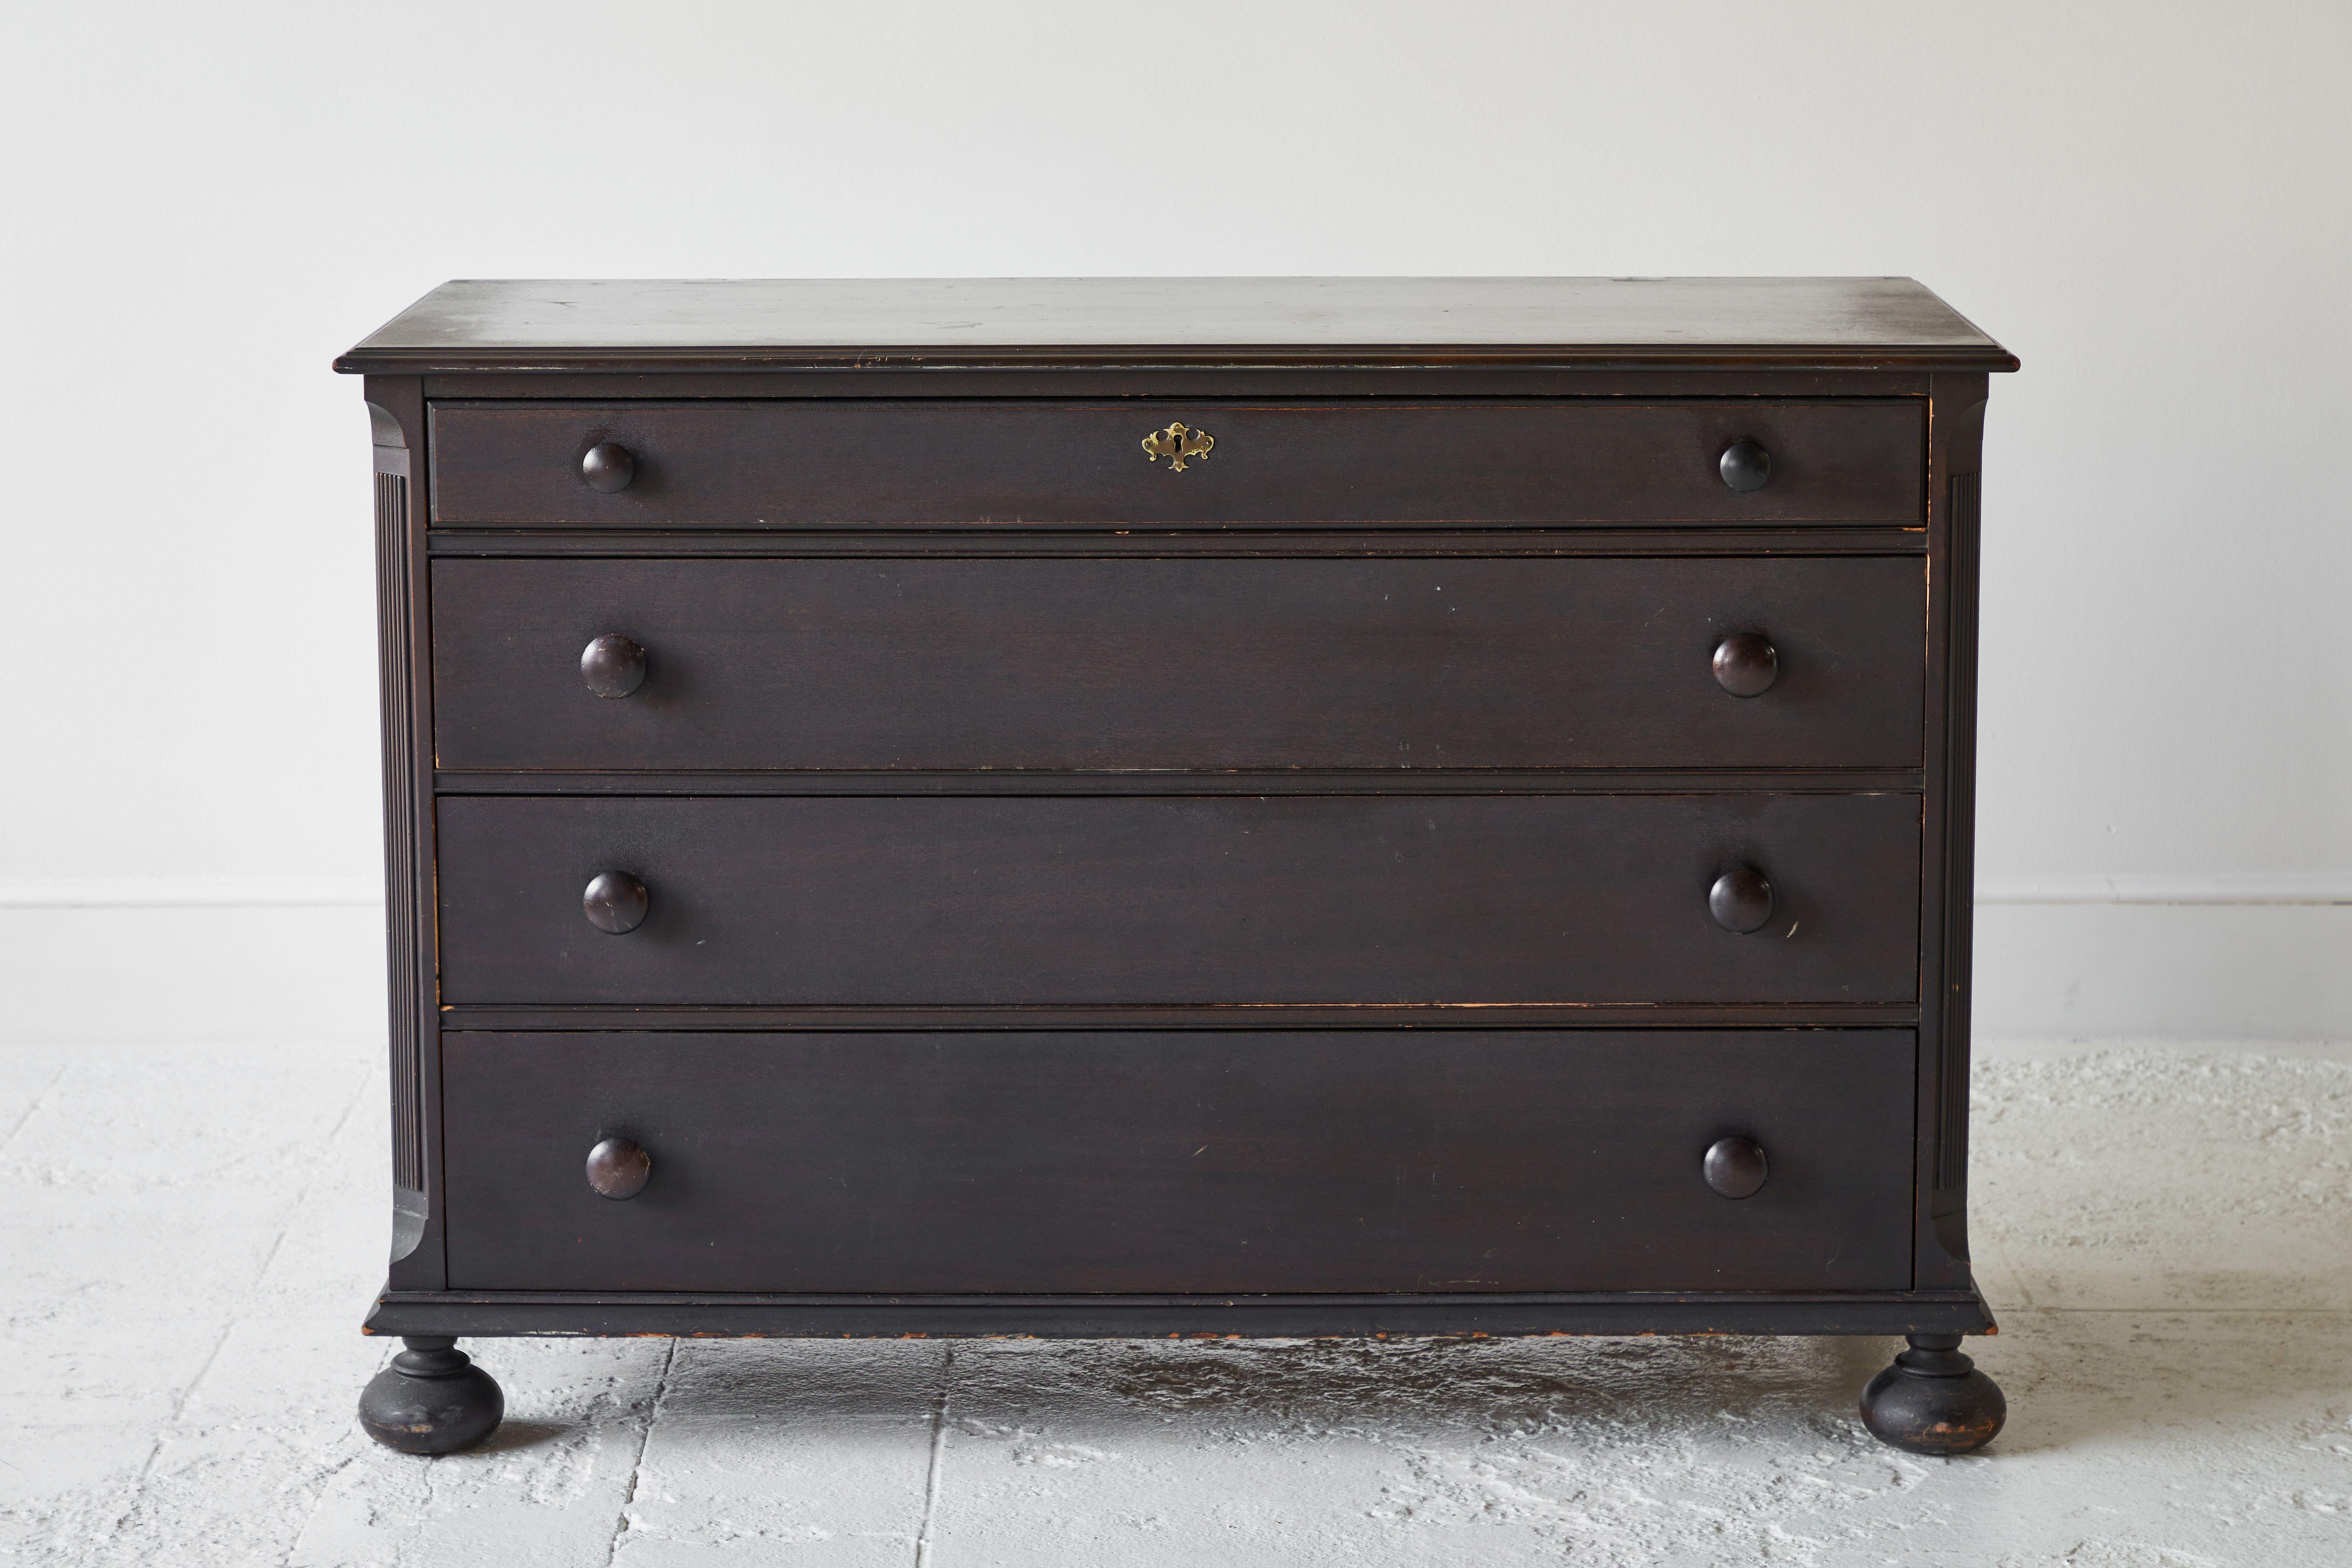 Vintage classic four-drawer chest of drawers with dark stained finish and round bun feet. Original hardware and original finish.